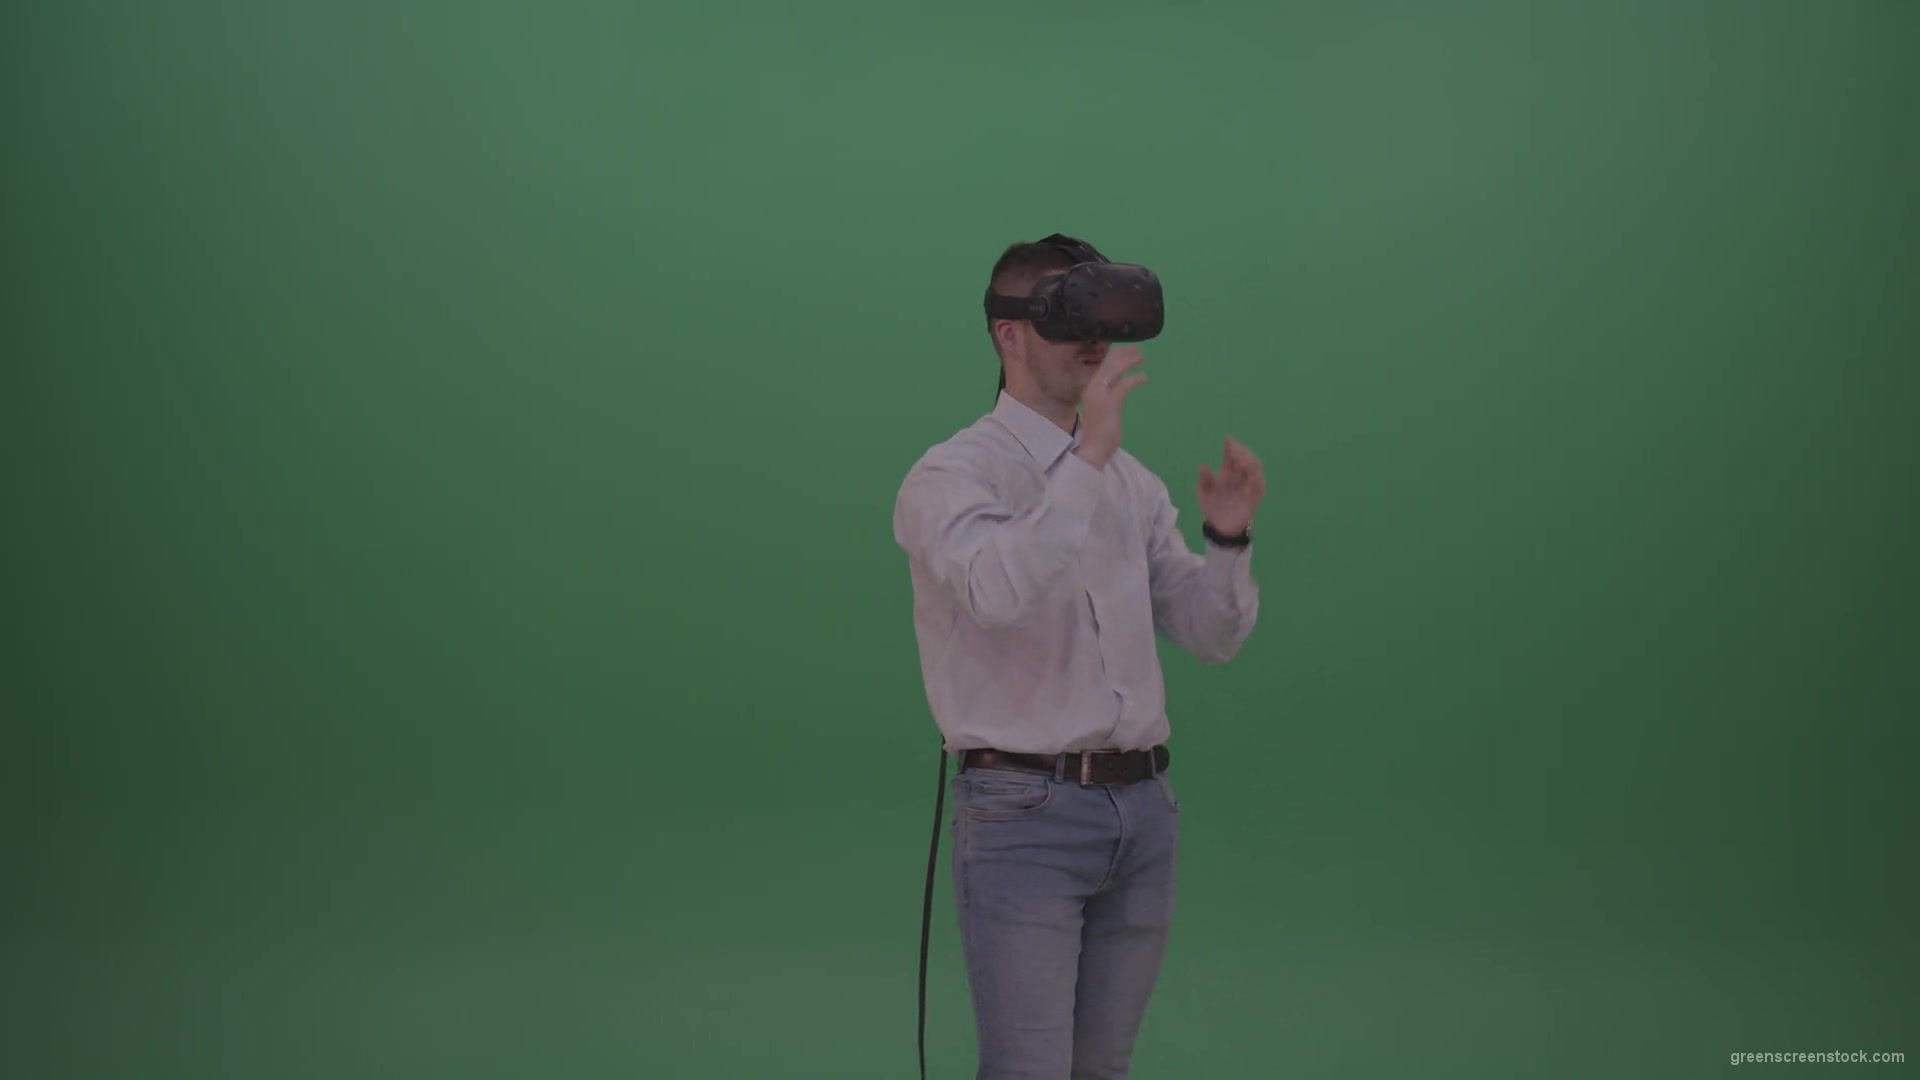 Young_Man_Wearing_White_Shirt_Making_Hard_Decision_Using_Virtual_Glasses_To_Solve_The_Task_Green_Screen_Wall_Chroma_Key_Background-1920_005 Green Screen Stock